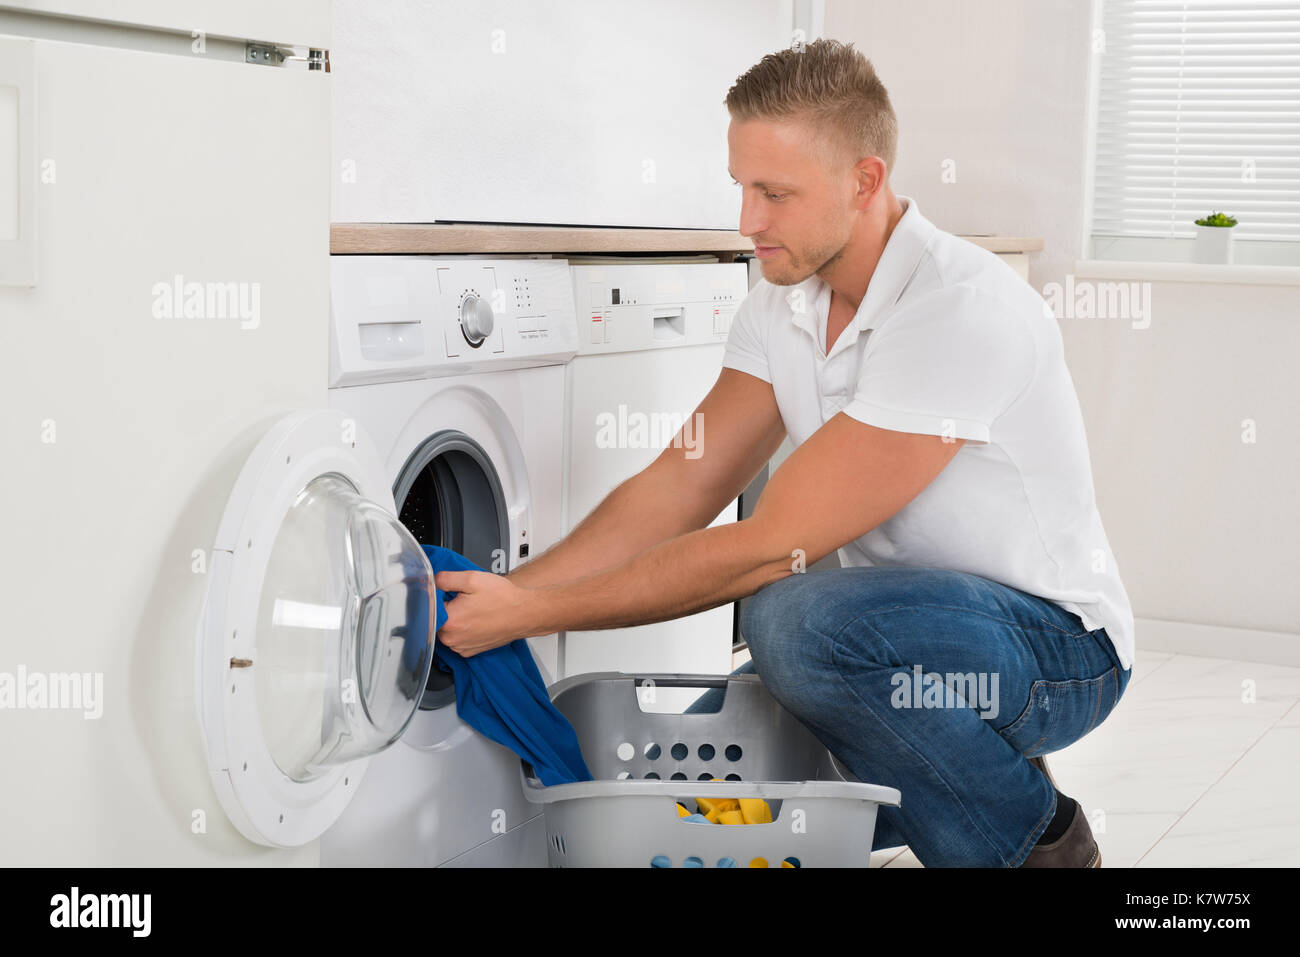 Man With Laundry Basket Loading Washing Machine With Clothes In Kitchen Room Stock Photo